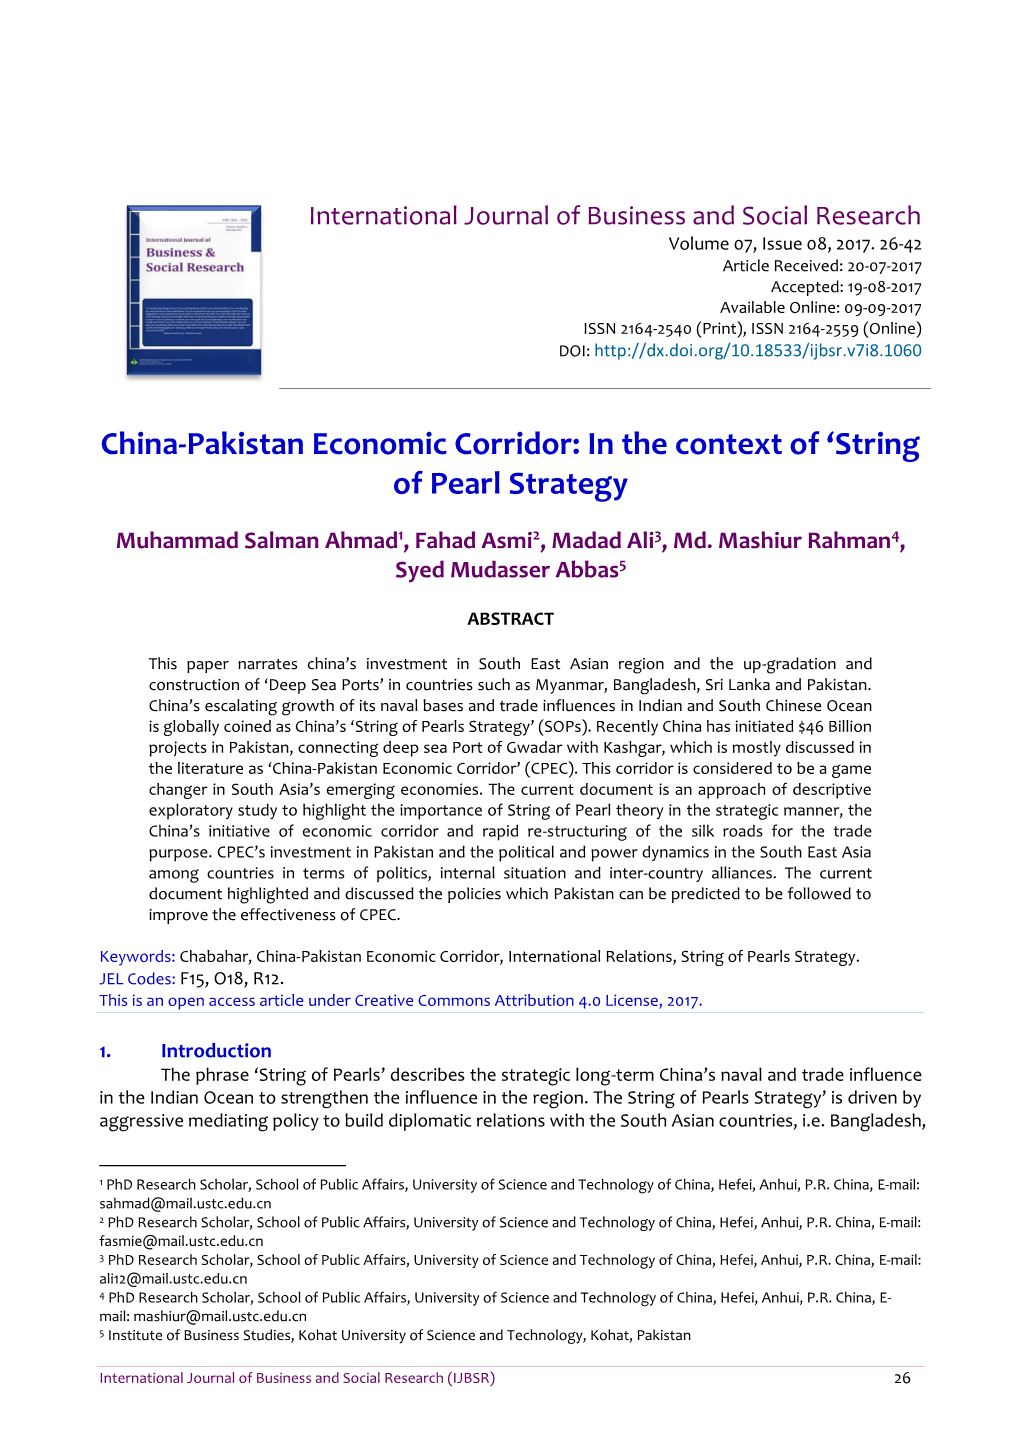 China-Pakistan Economic Corridor: in the Context of ‘String of Pearl Strategy